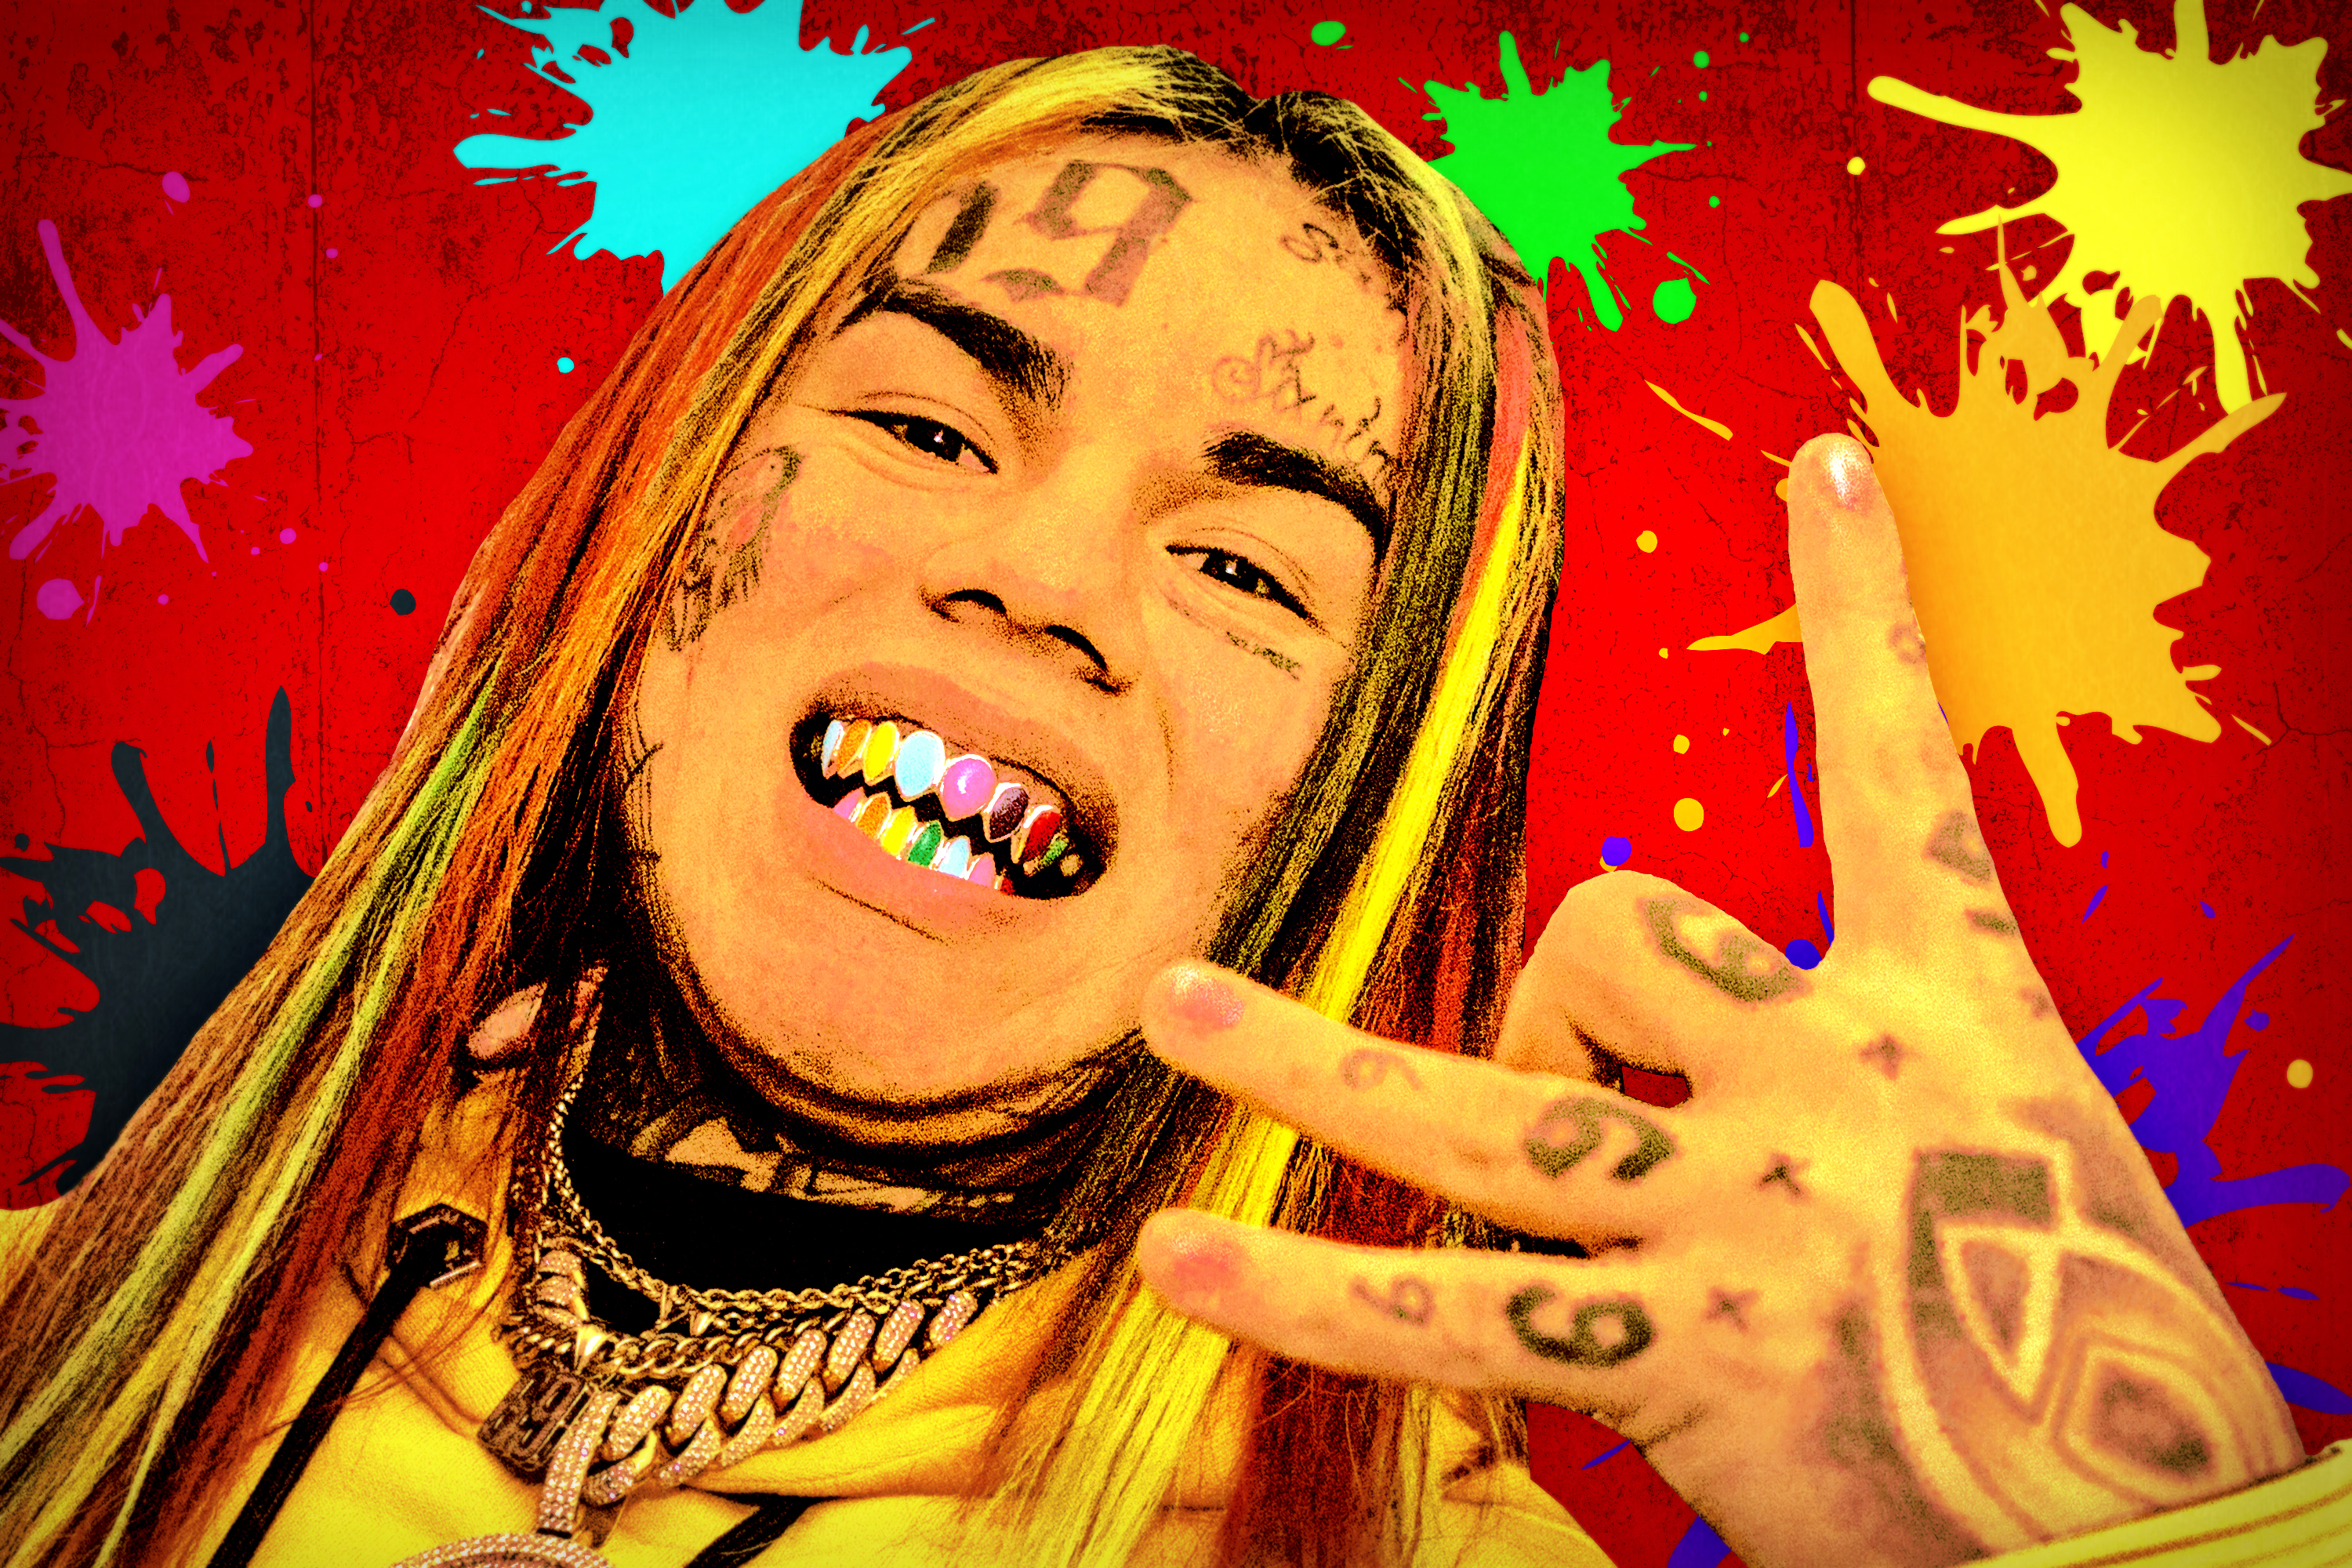 Meet 6ix9ine The First Rap Star of 2018 Is Easy to Hate